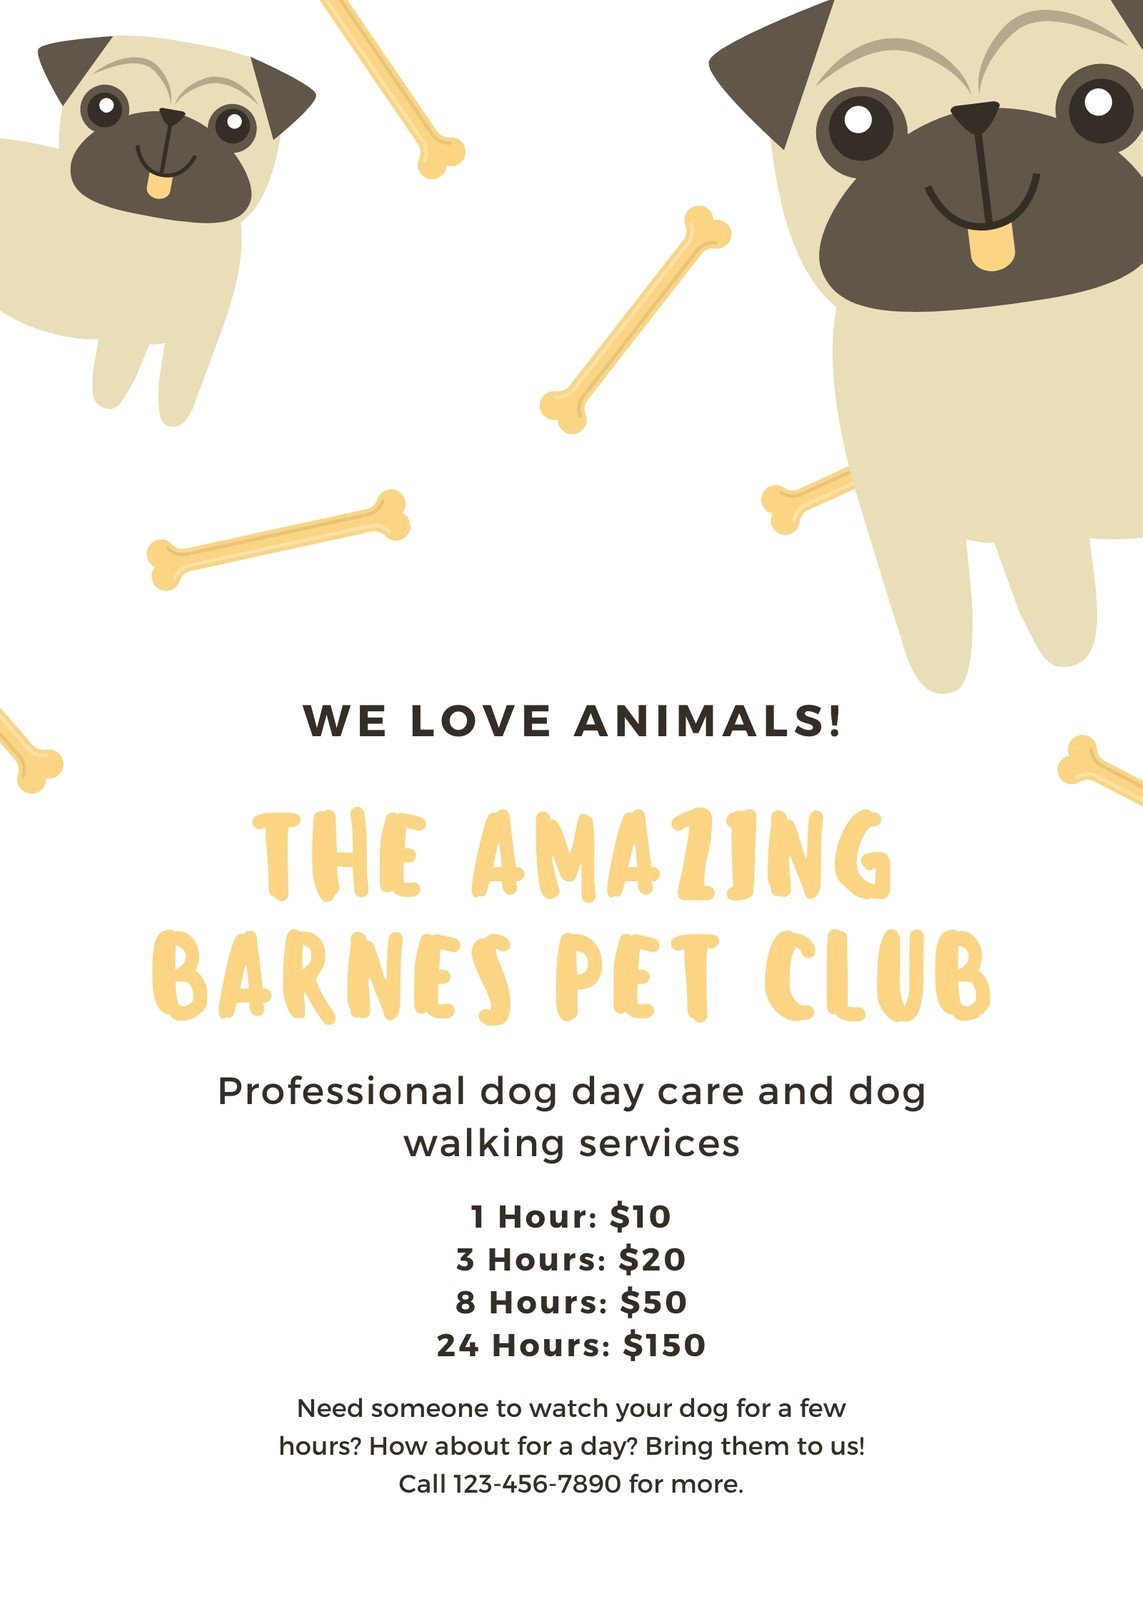 Free printable animal flyer templates you can customize | Canva